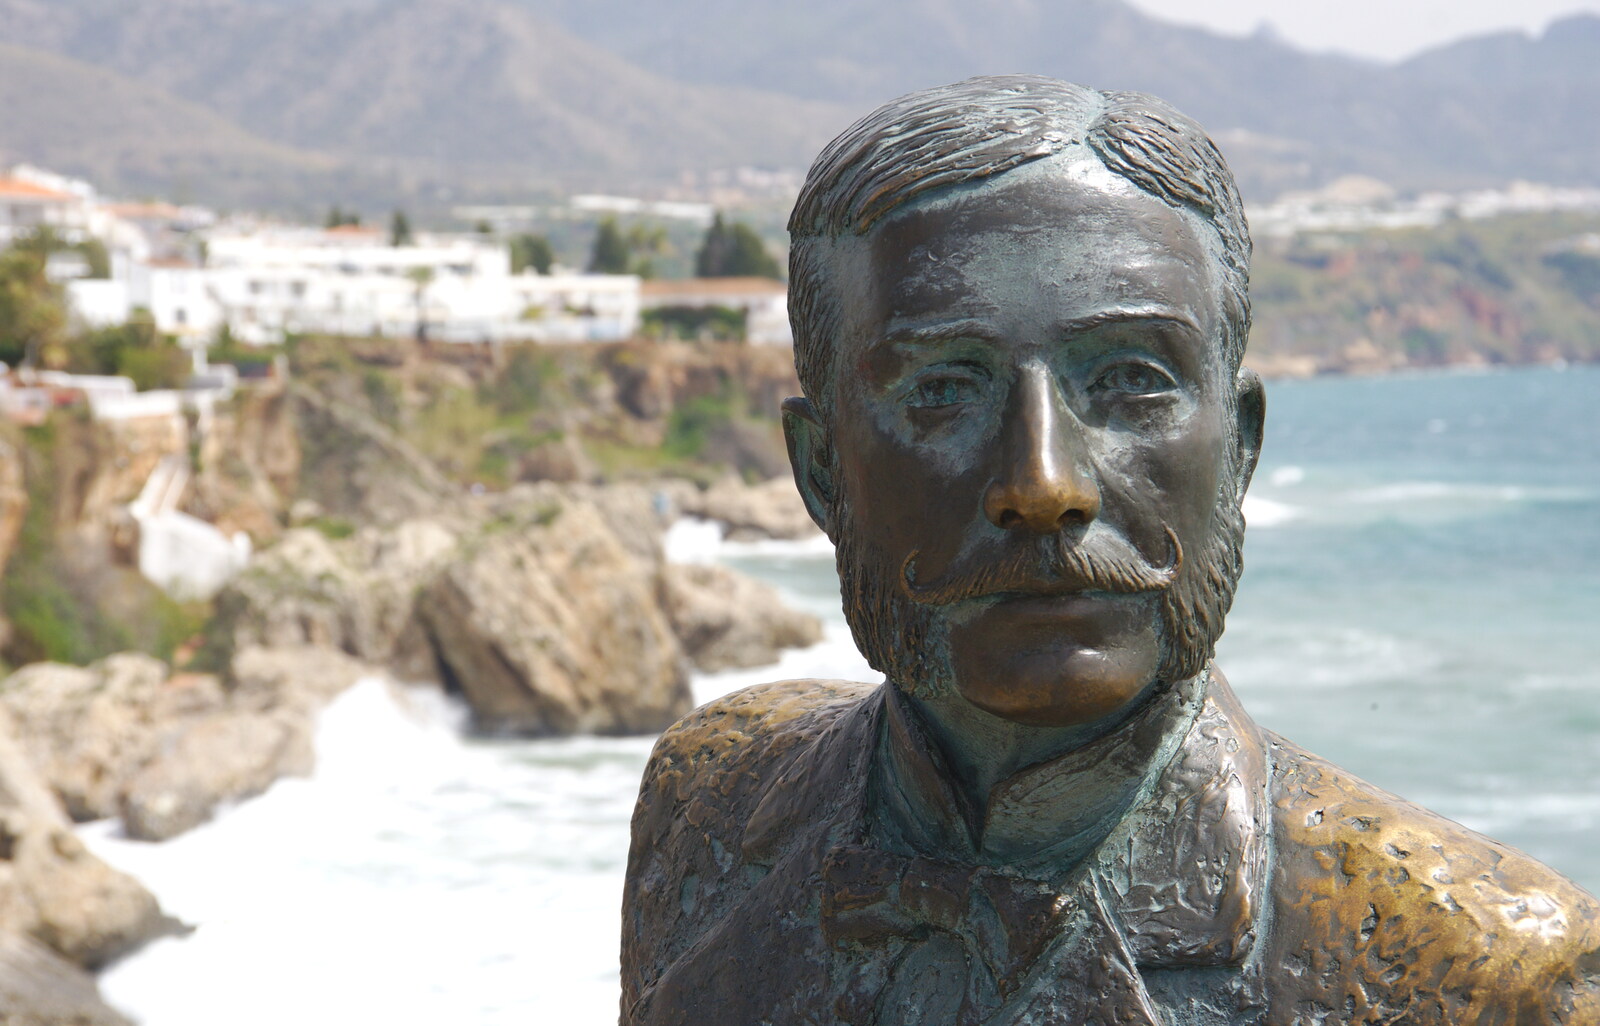 King Alfonso XII on the Balcon de Europa from Torrecilla Beach and the Nerja Museum, Andalusia, Spain - 17th April 2019